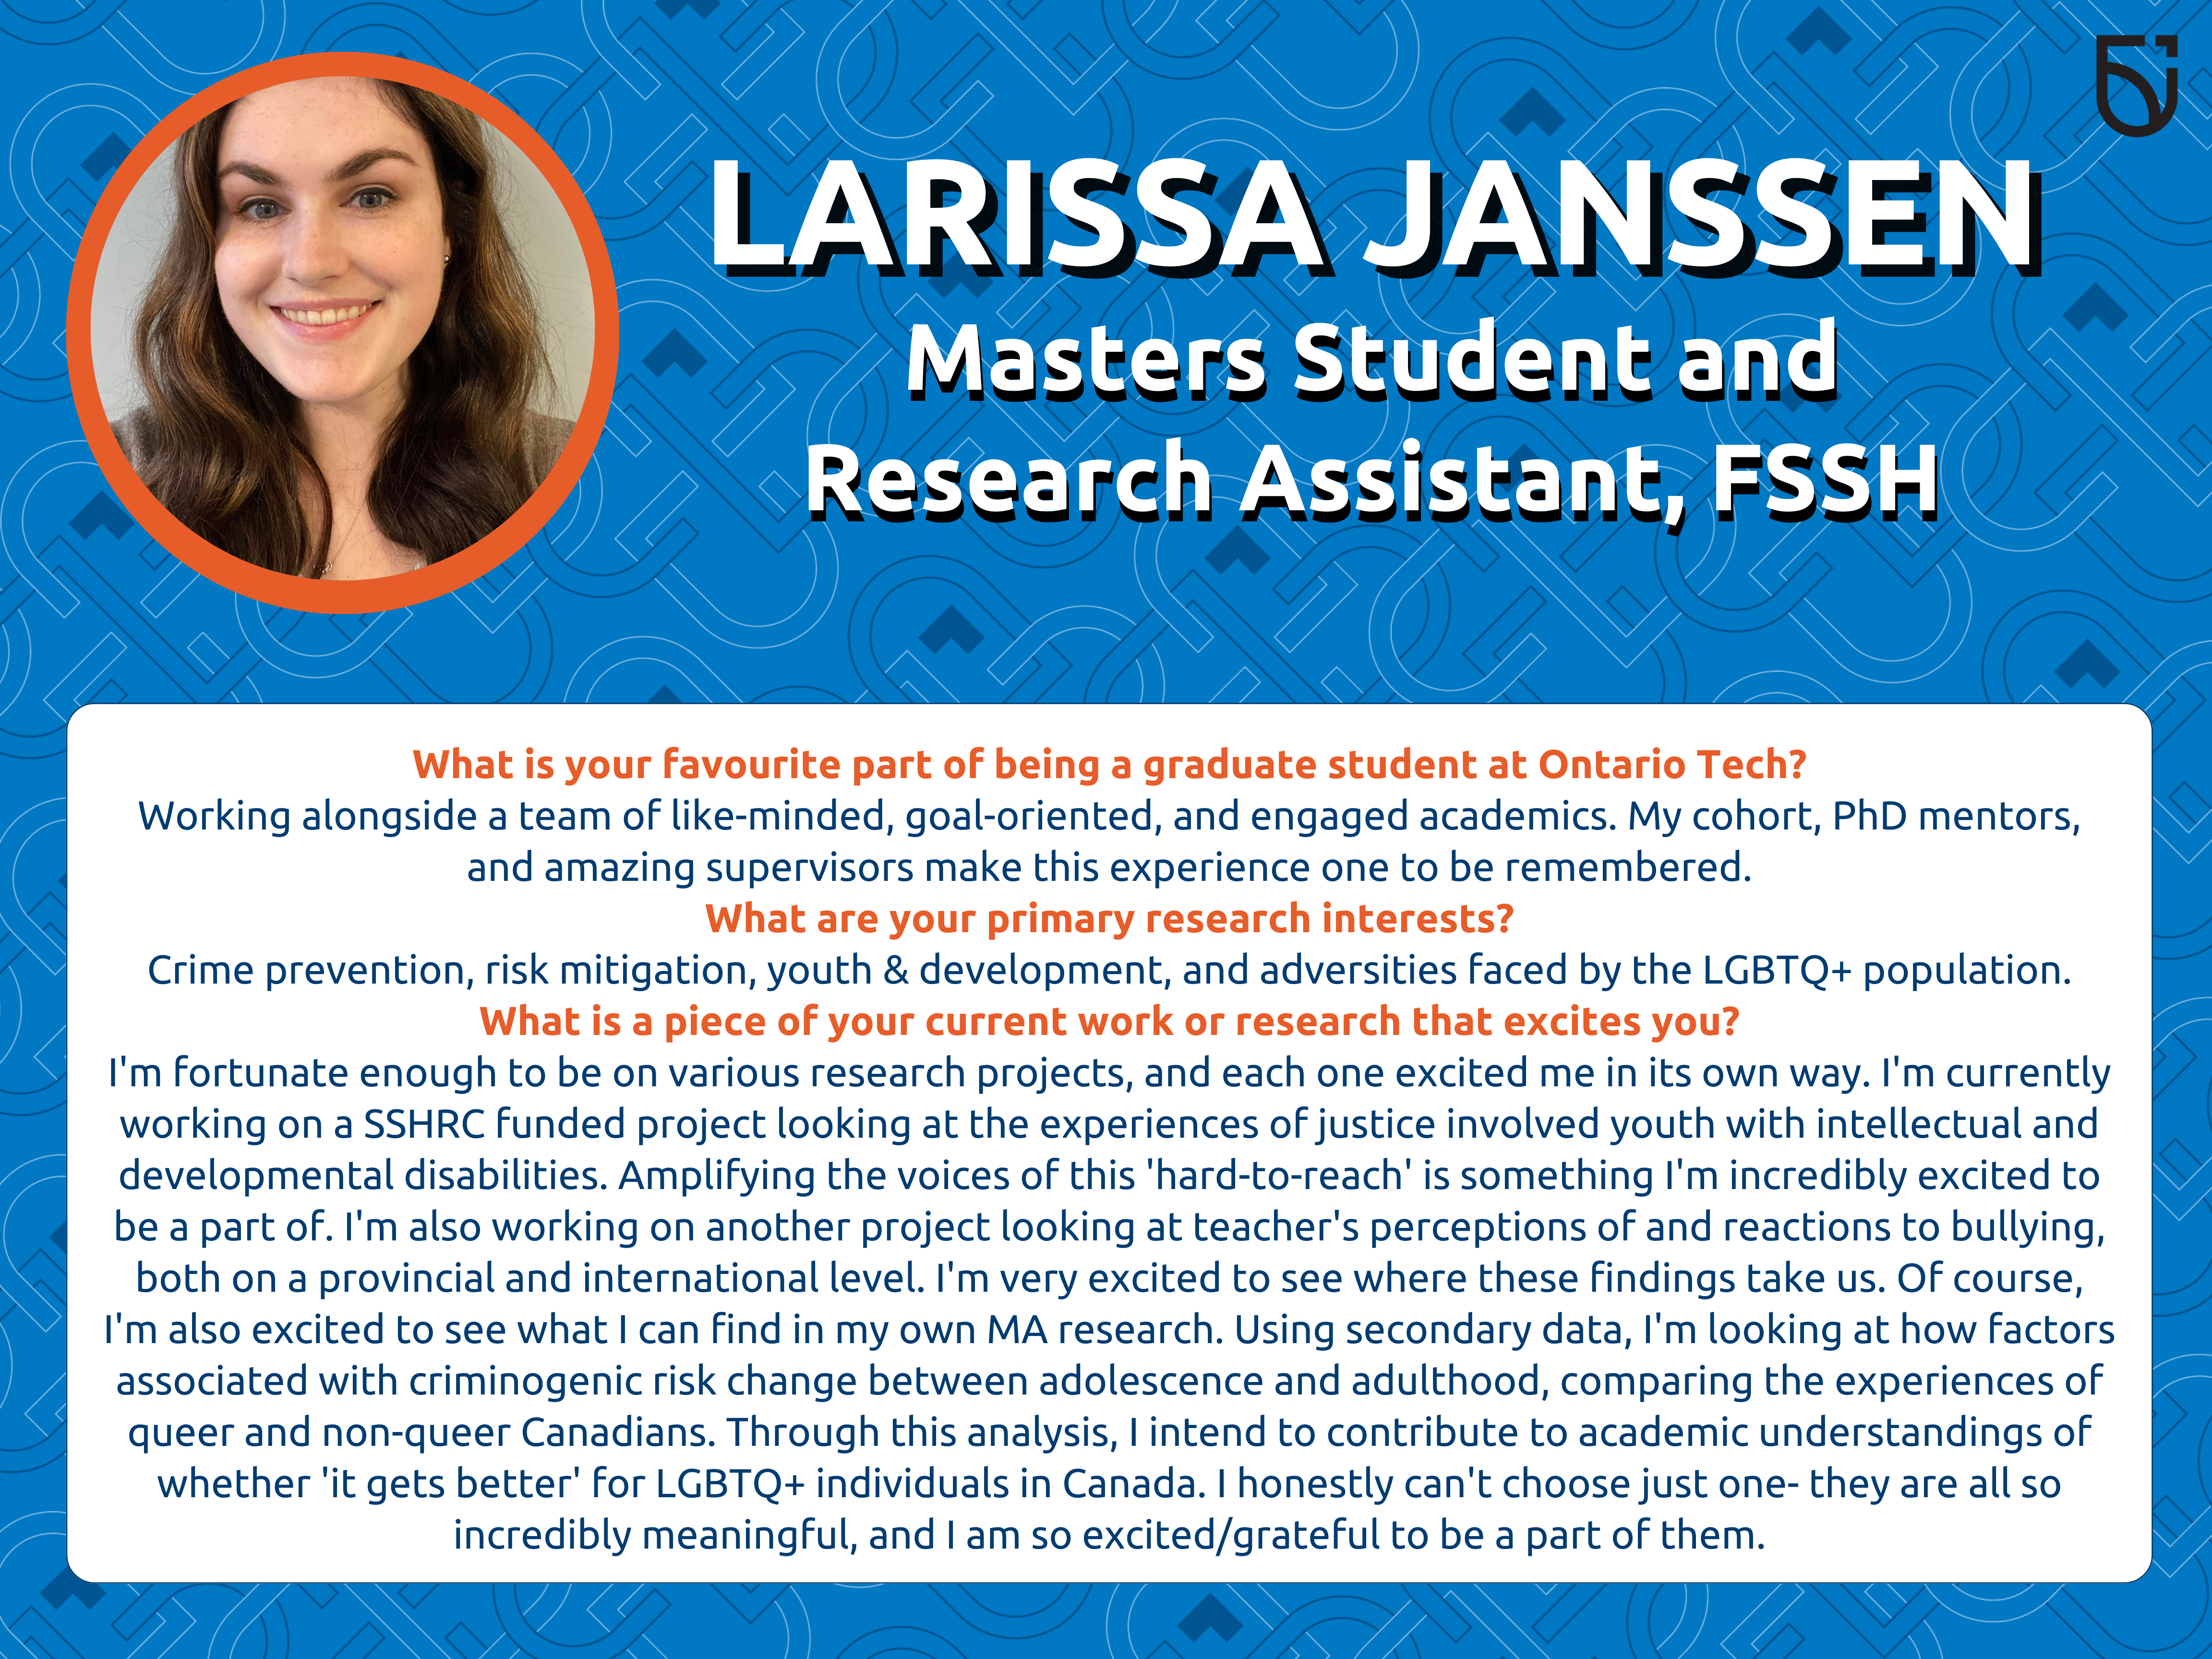 This photo is a Women’s Wednesday feature of Larissa Janssen, a Masters Student, in the Faculty of Social Science and Humanities.